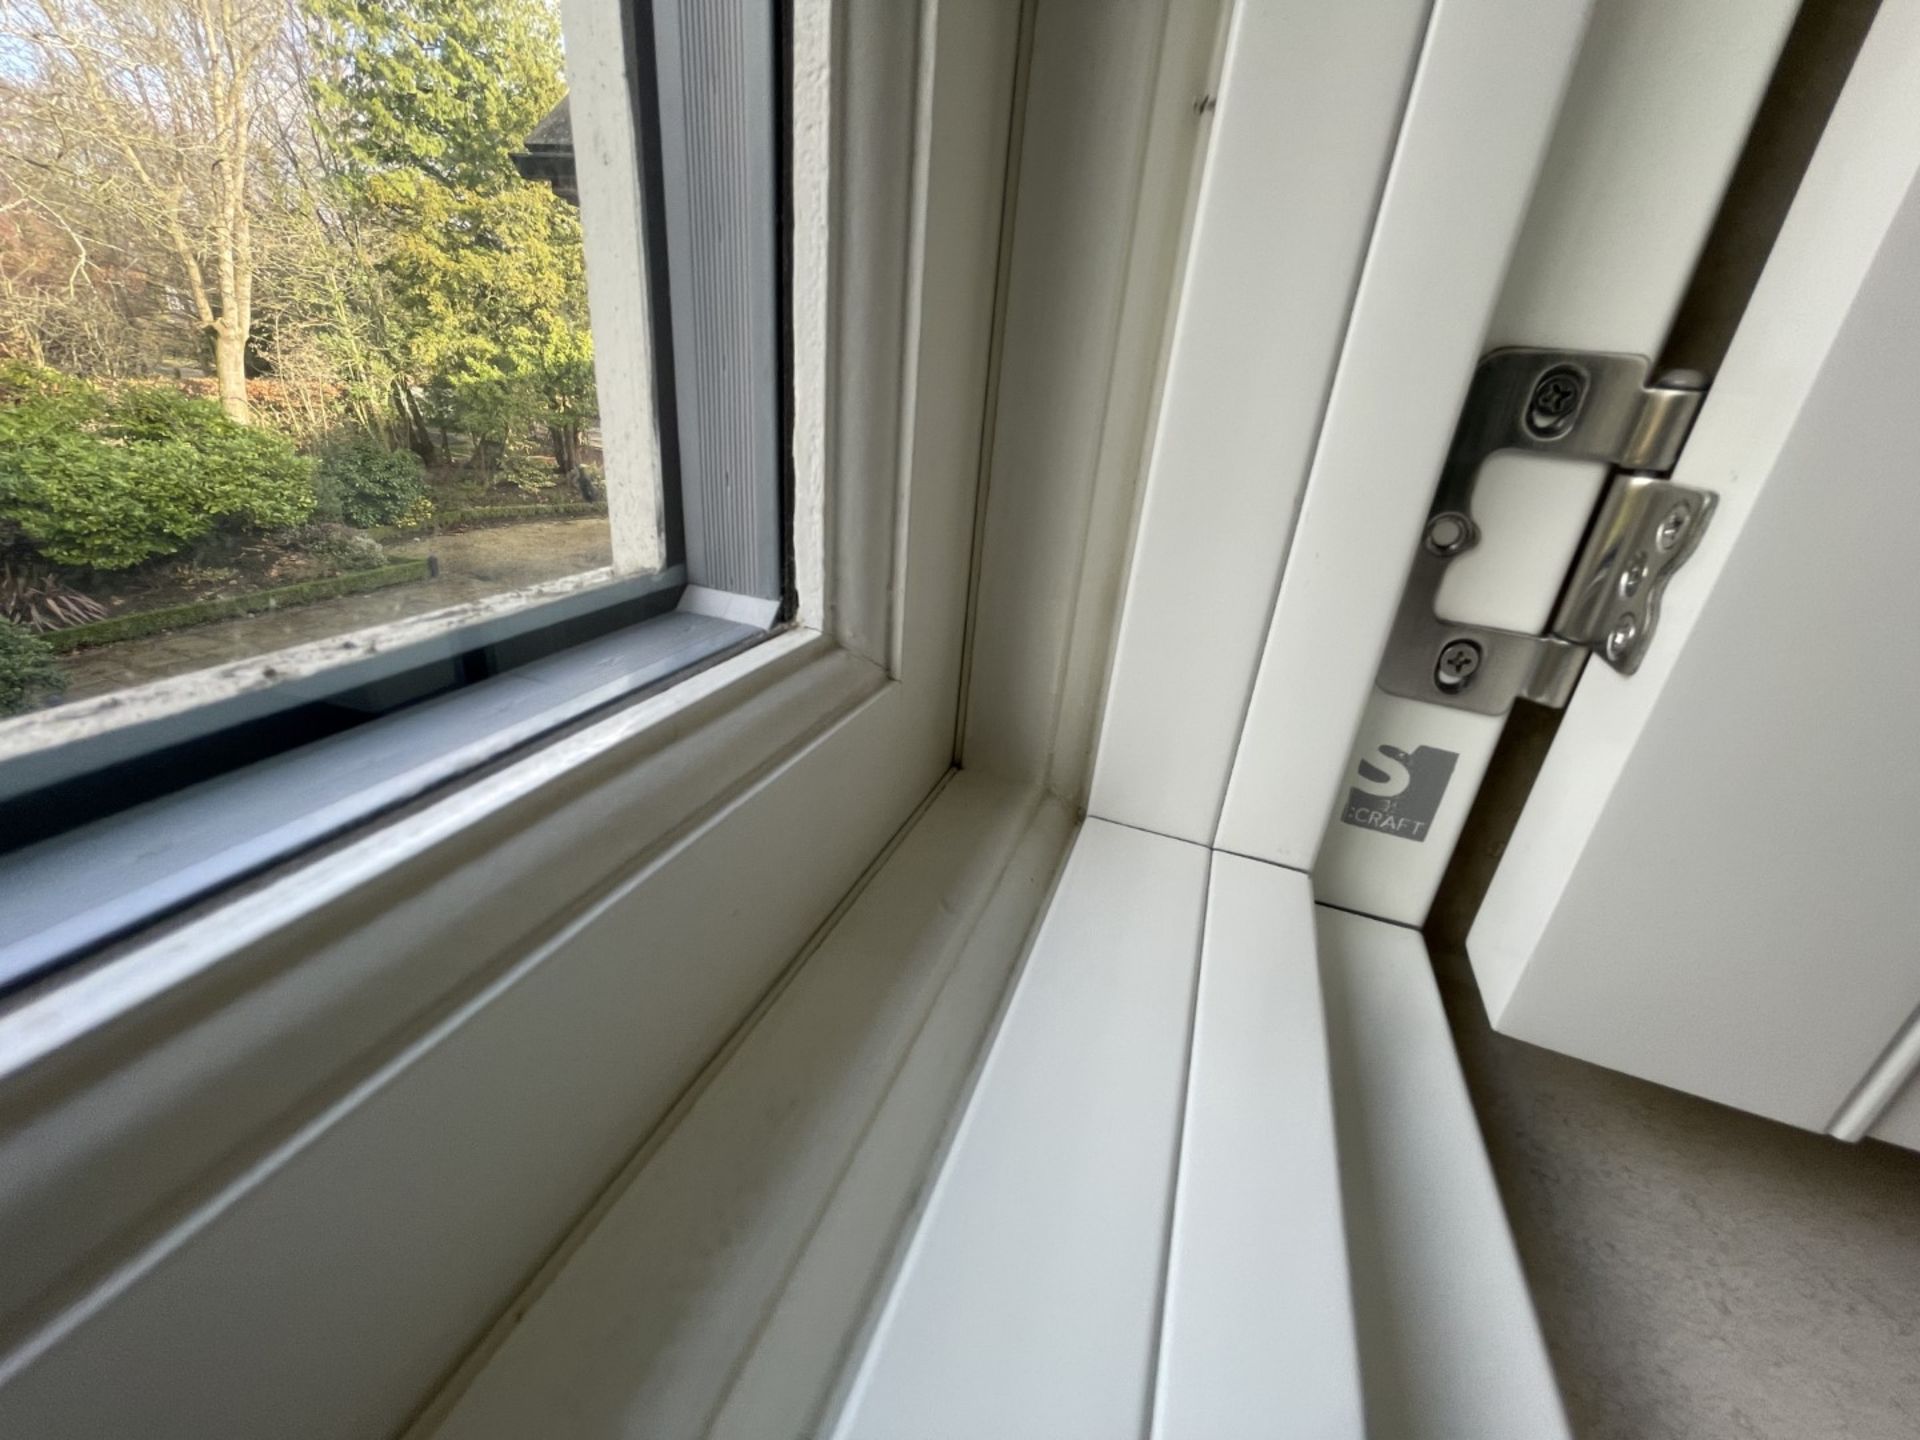 1 x Hardwood Timber Double Glazed Leaded 3-Pane Window Frame fitted with Shutter Blinds - Image 5 of 15